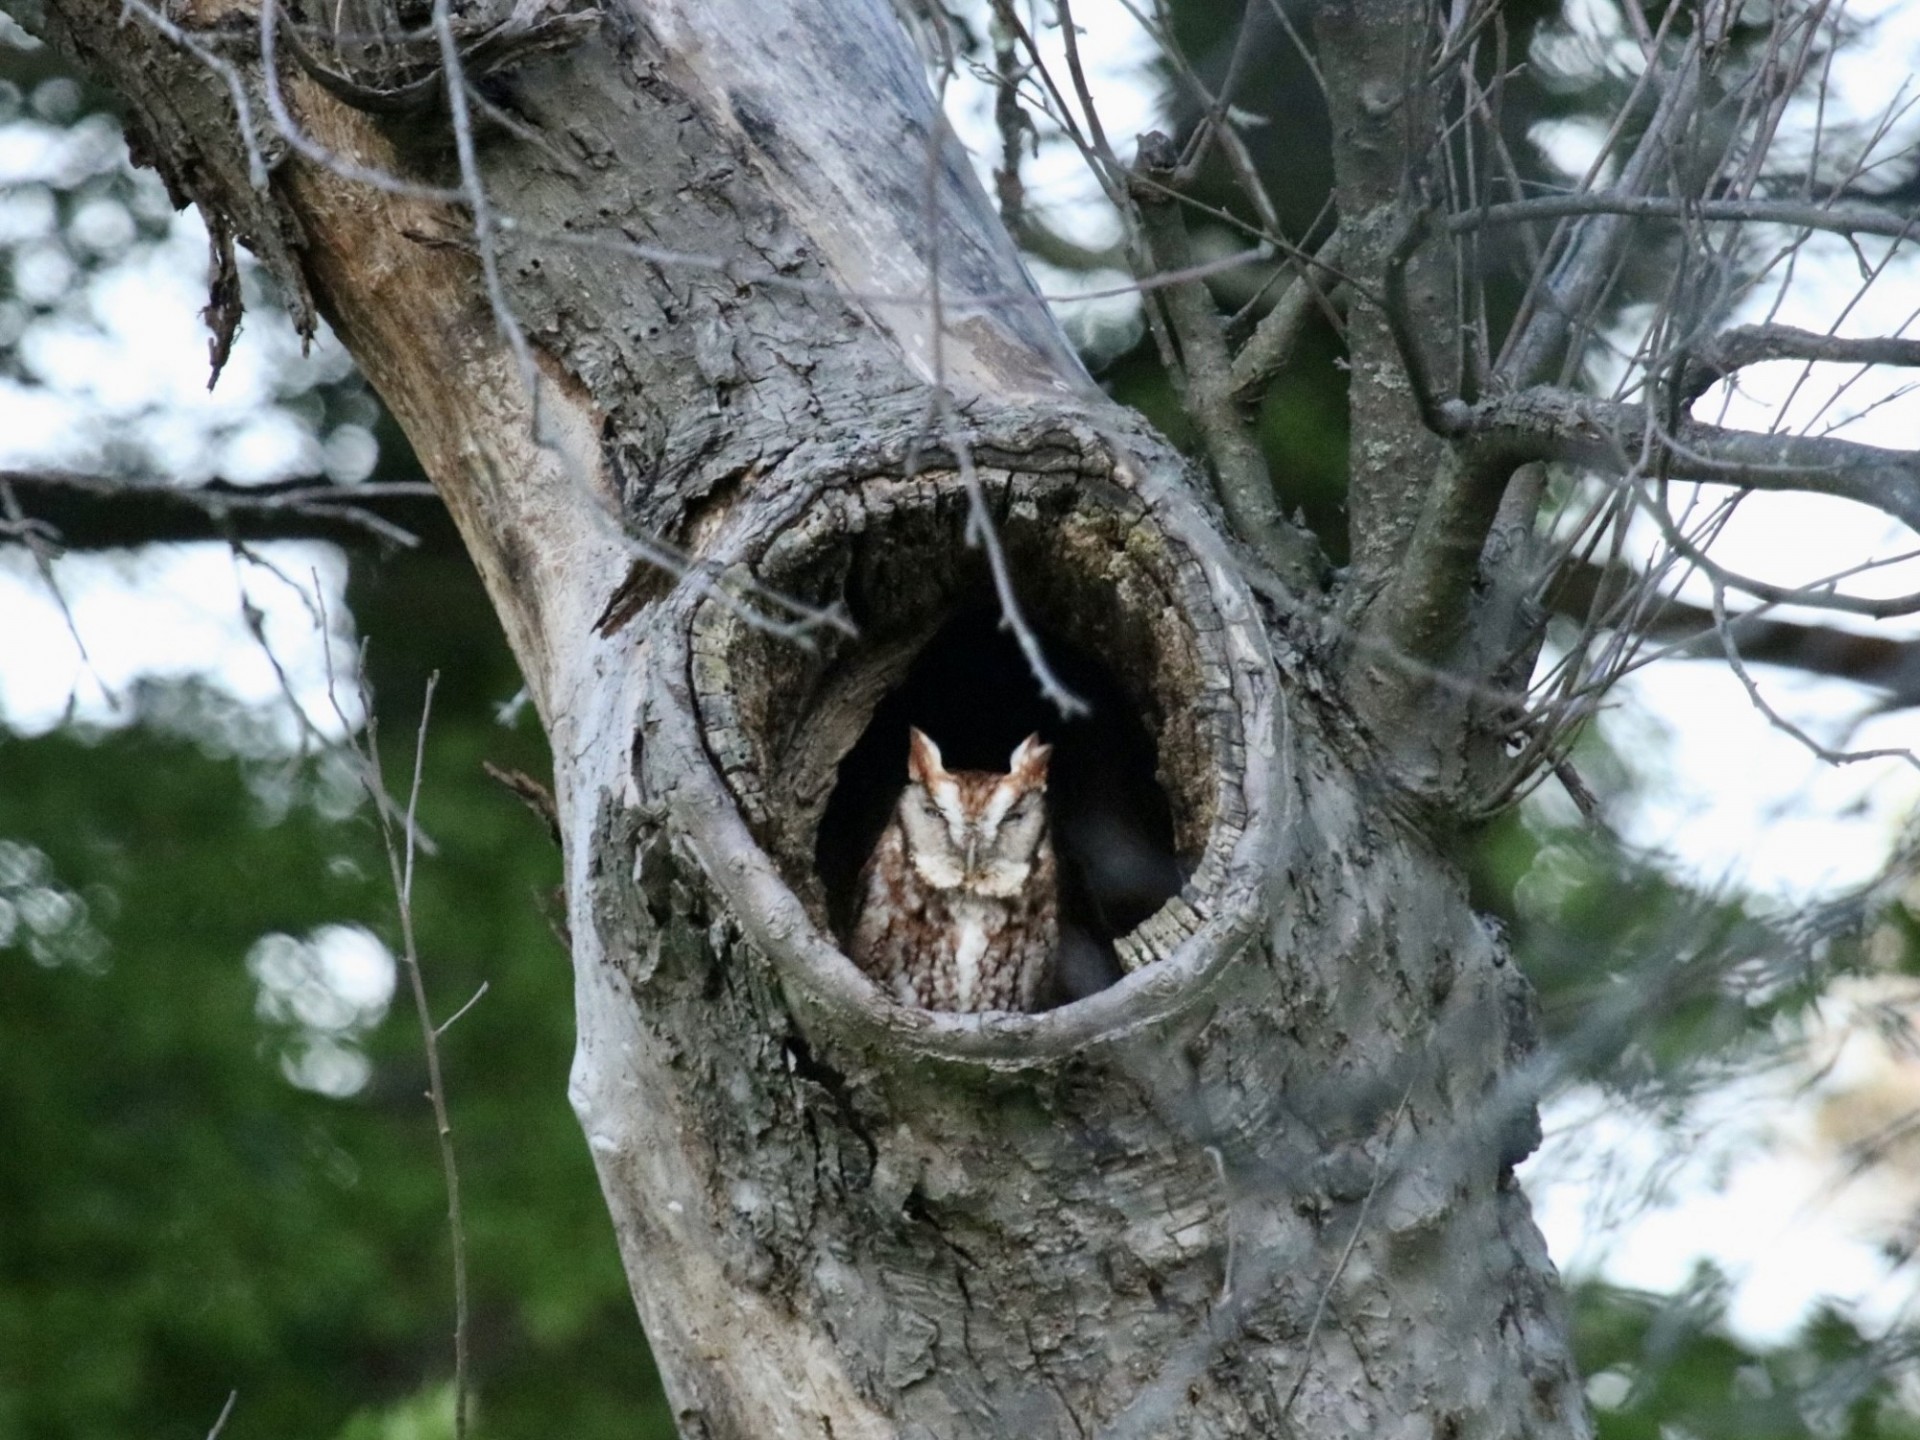 Eastern screech owl in an apple tree on Lamont-Doherty Earth Observatory campus Credit: Timothy Trimble, Lamont-Doherty Earth Observatory